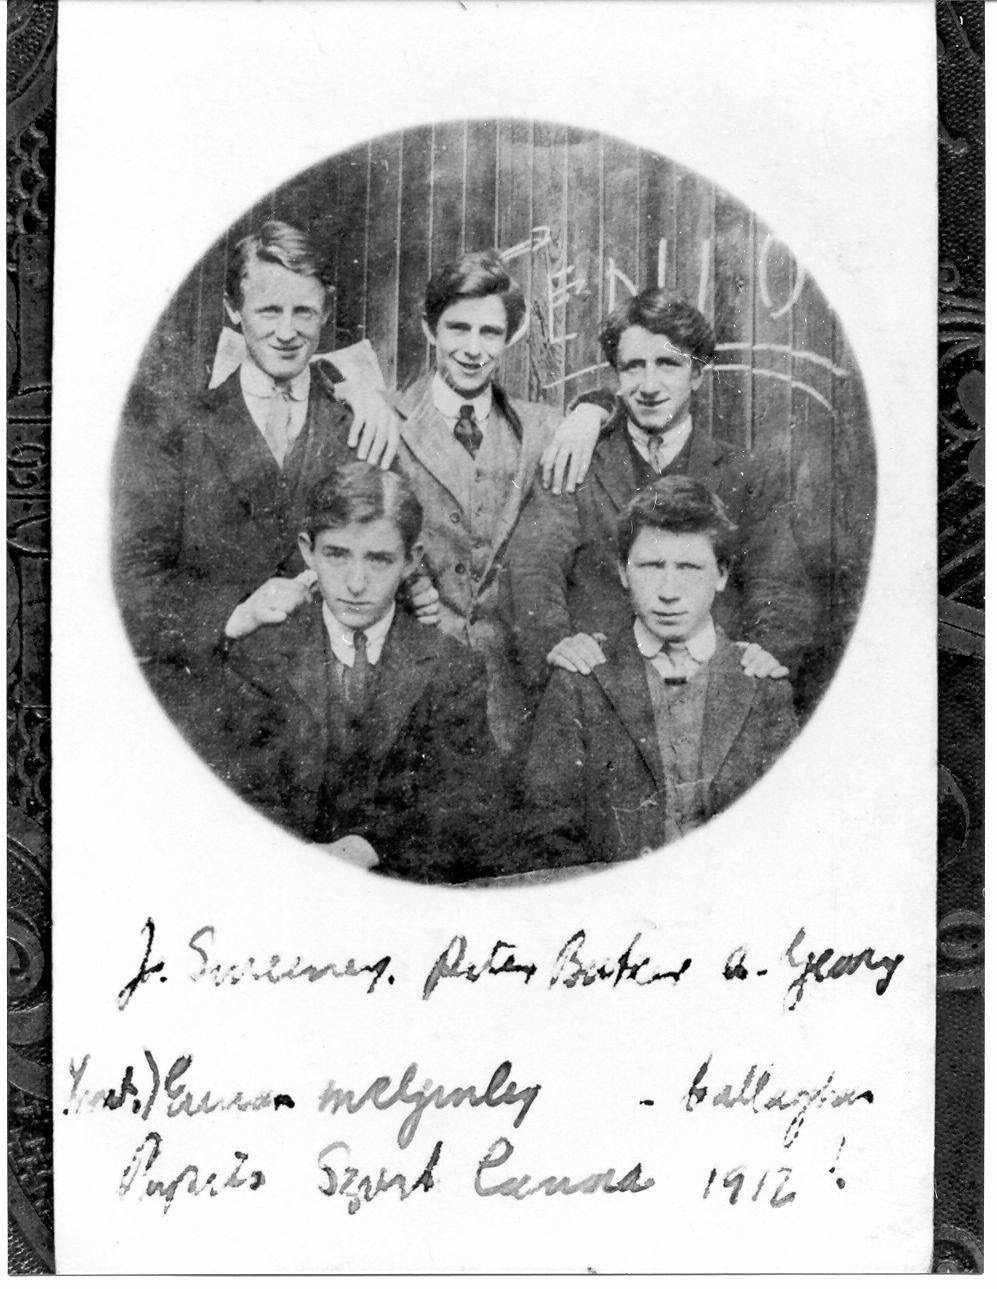 1916 Connections: The McGinley brothers